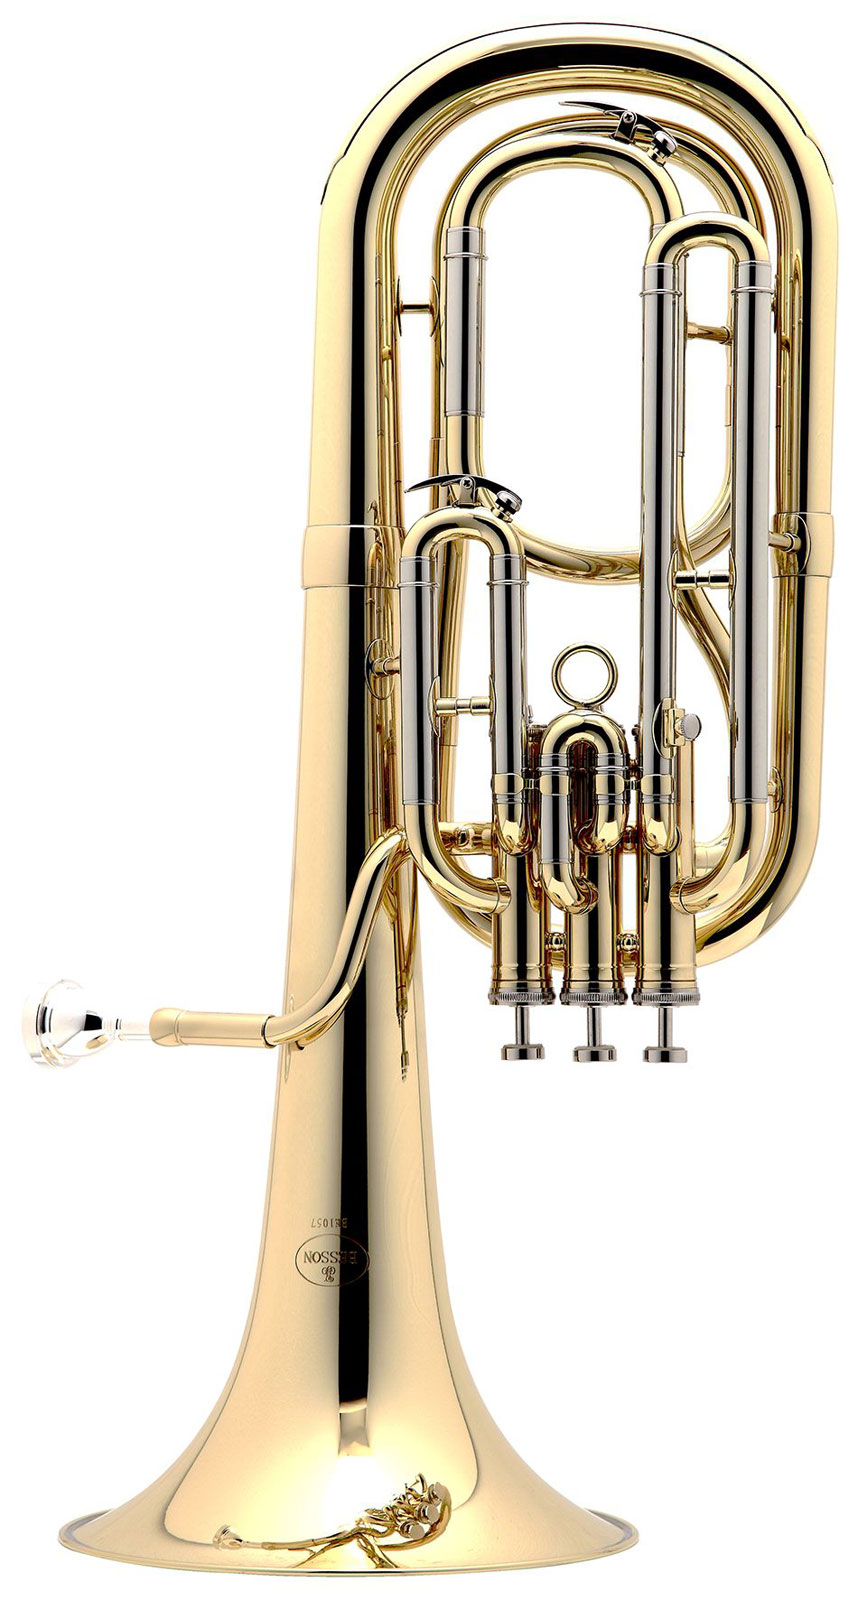 BESSON BE157-1-0 - PRODIGE 157 CLEAR LACQUER